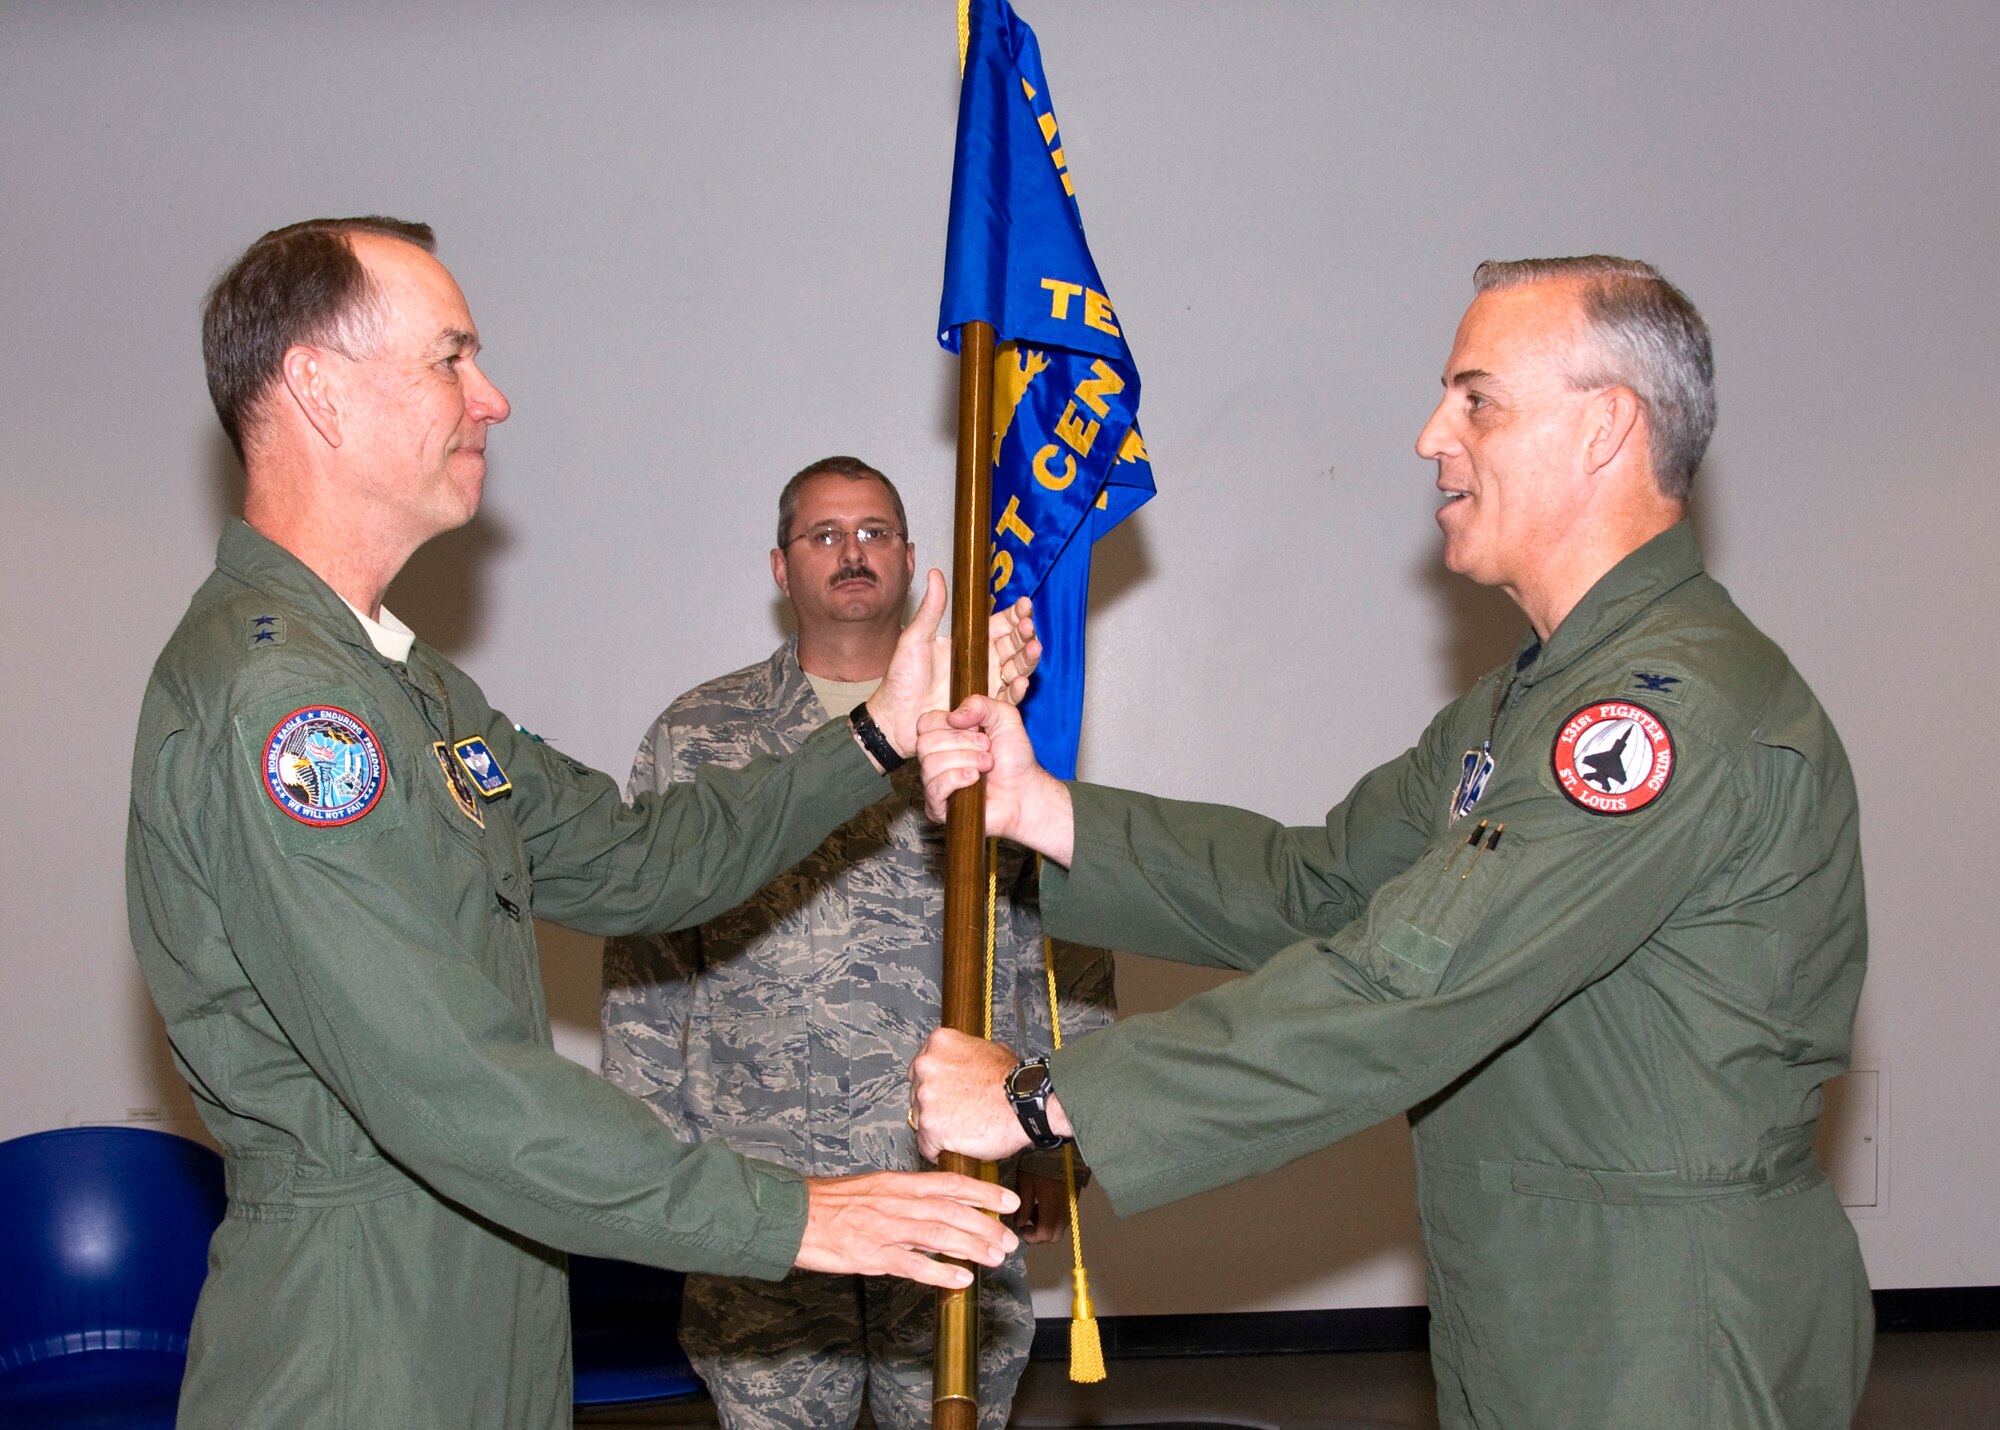 Col. Richard Dennee, right, assumes command of the Air National Guard Air Force Reserve Command Test Center with a symbolic passing of the AATC guideon from Maj. Gen. Rick Moisio, Air National Guard deputy director, May 21. (Air Force photo by Master Sgt. Dave Neve)